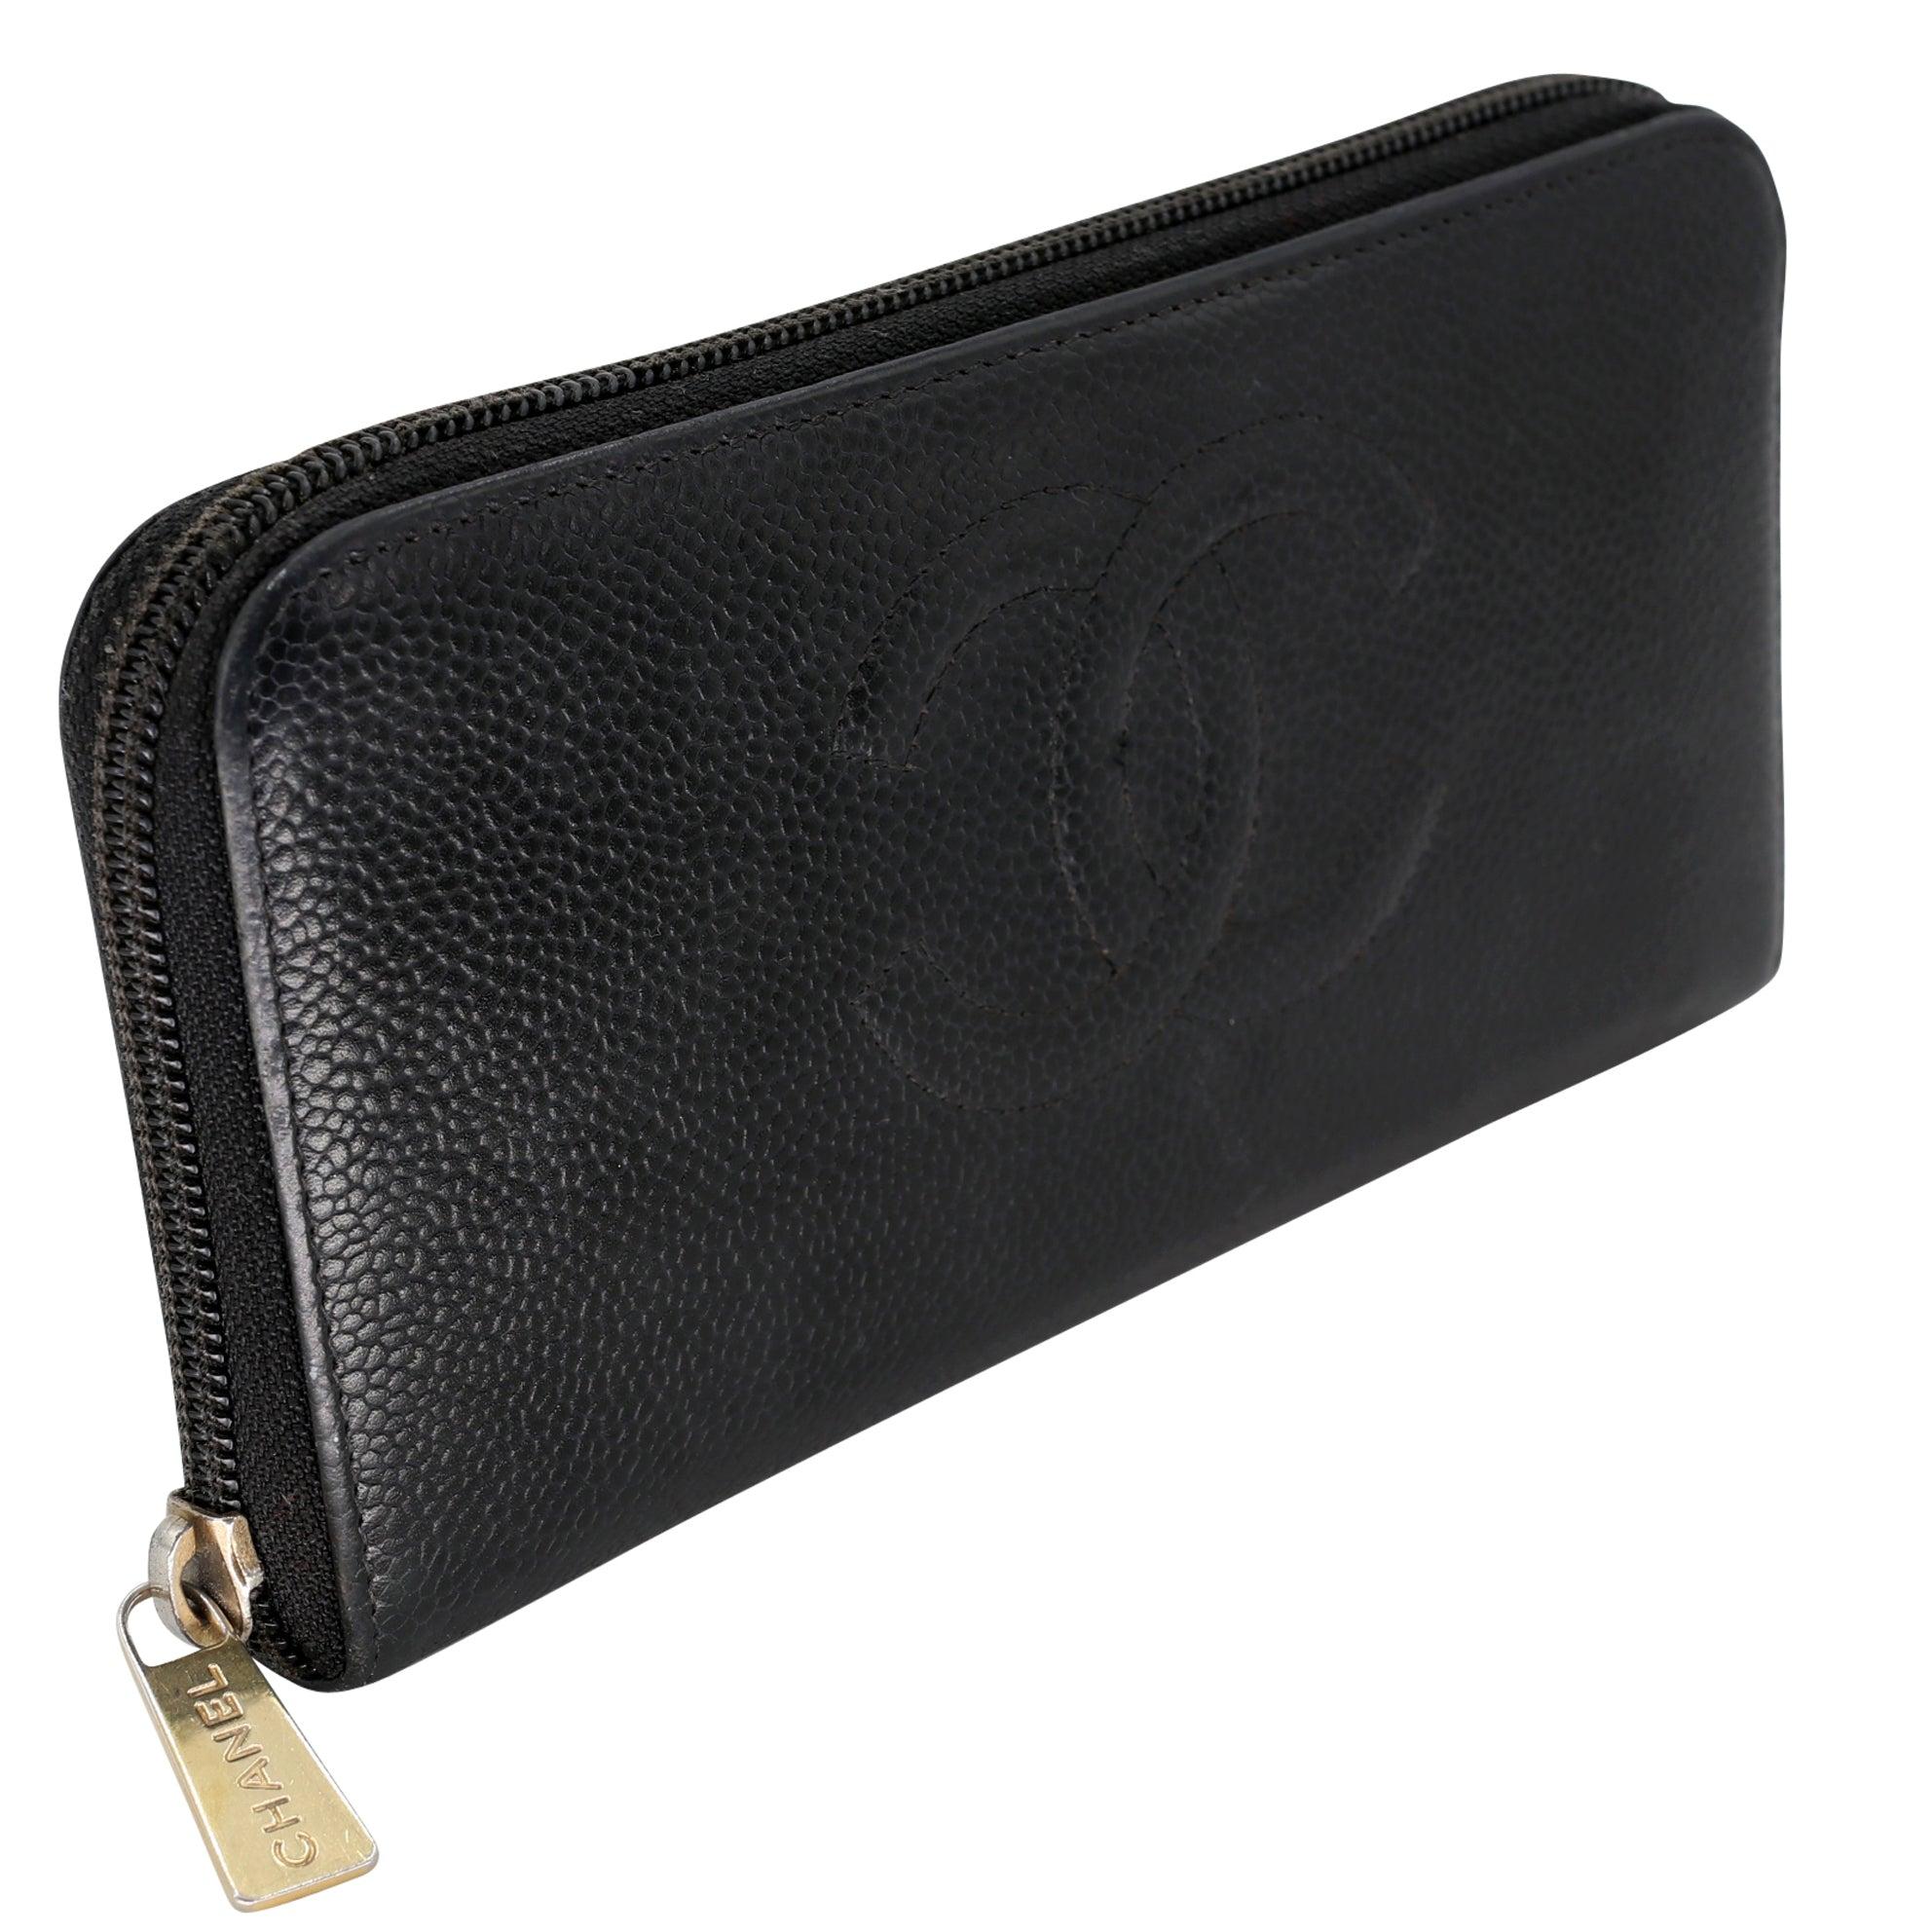 This Chanel Caviar Leather long wallet is perfect if you are seeking something chic and luxurious to organize your essentials such as bills, credit cards and coins. It features gorgeous black grain leather with a full zip around closure and the